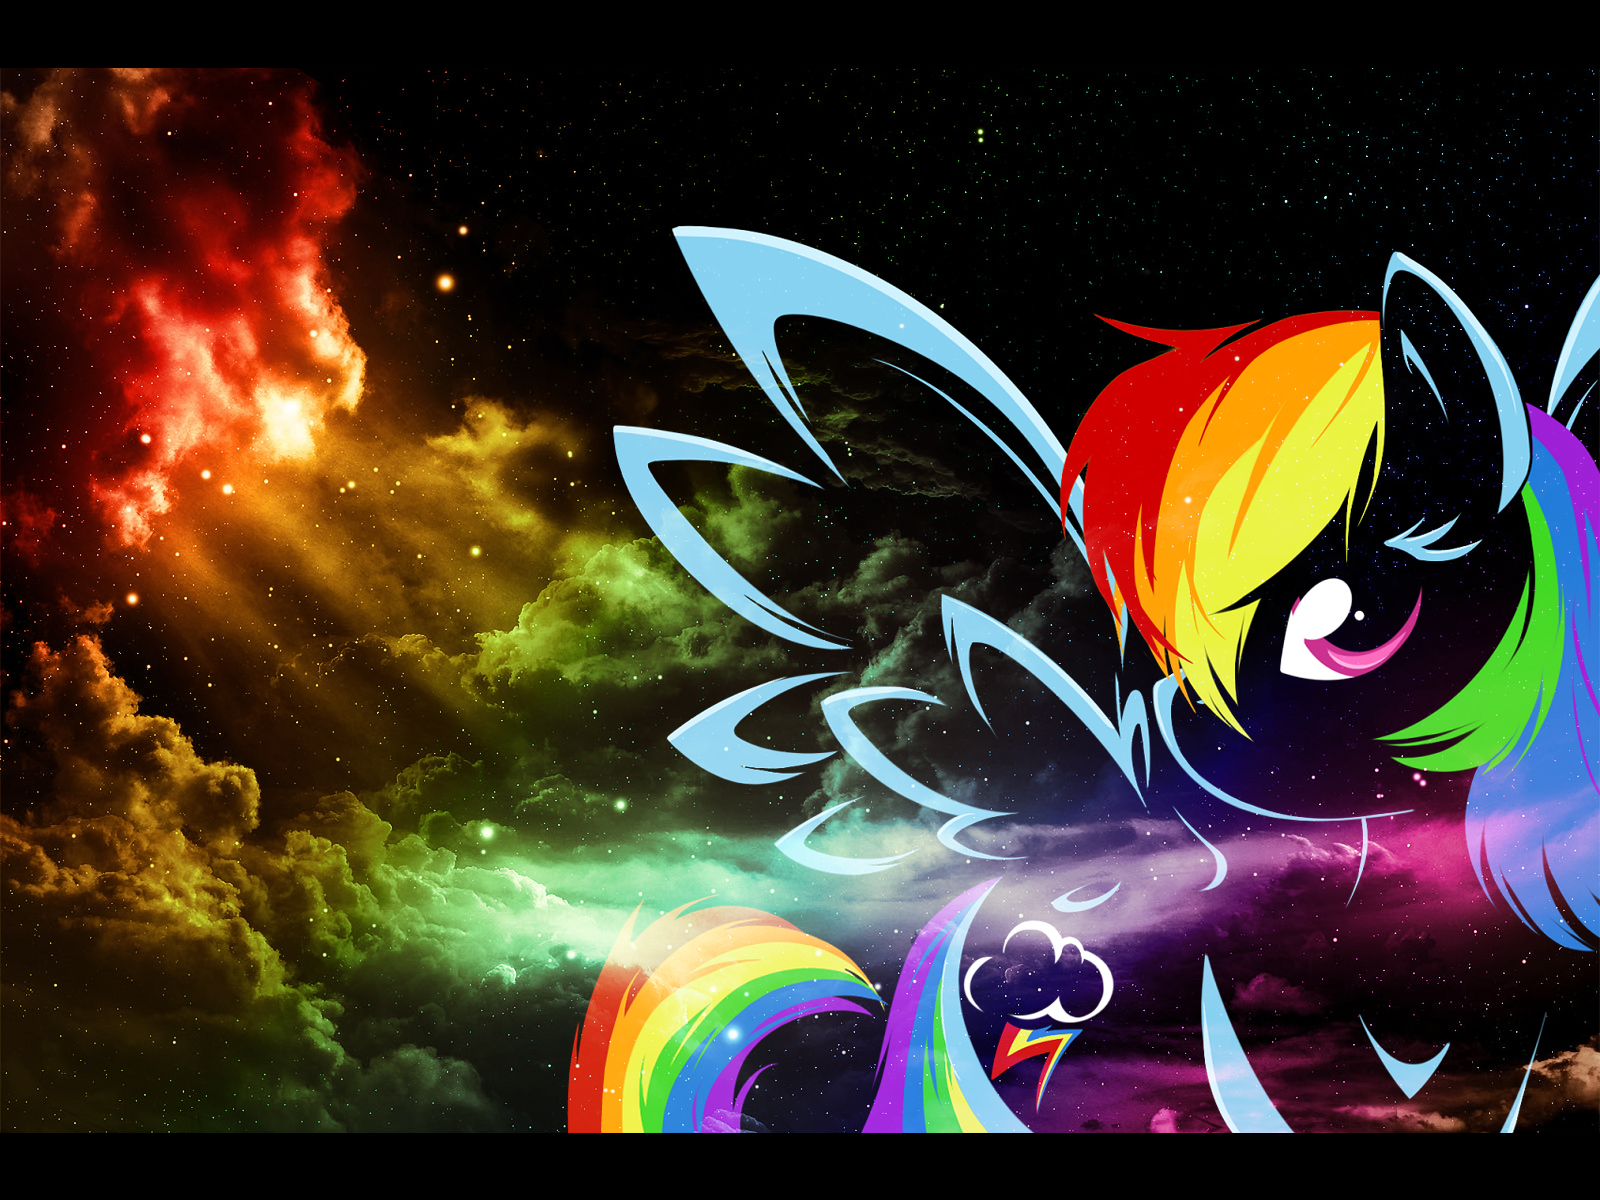 My Little Pony Friendship is Magic images Rainbow Dash Wallpapers HD 1600x1200